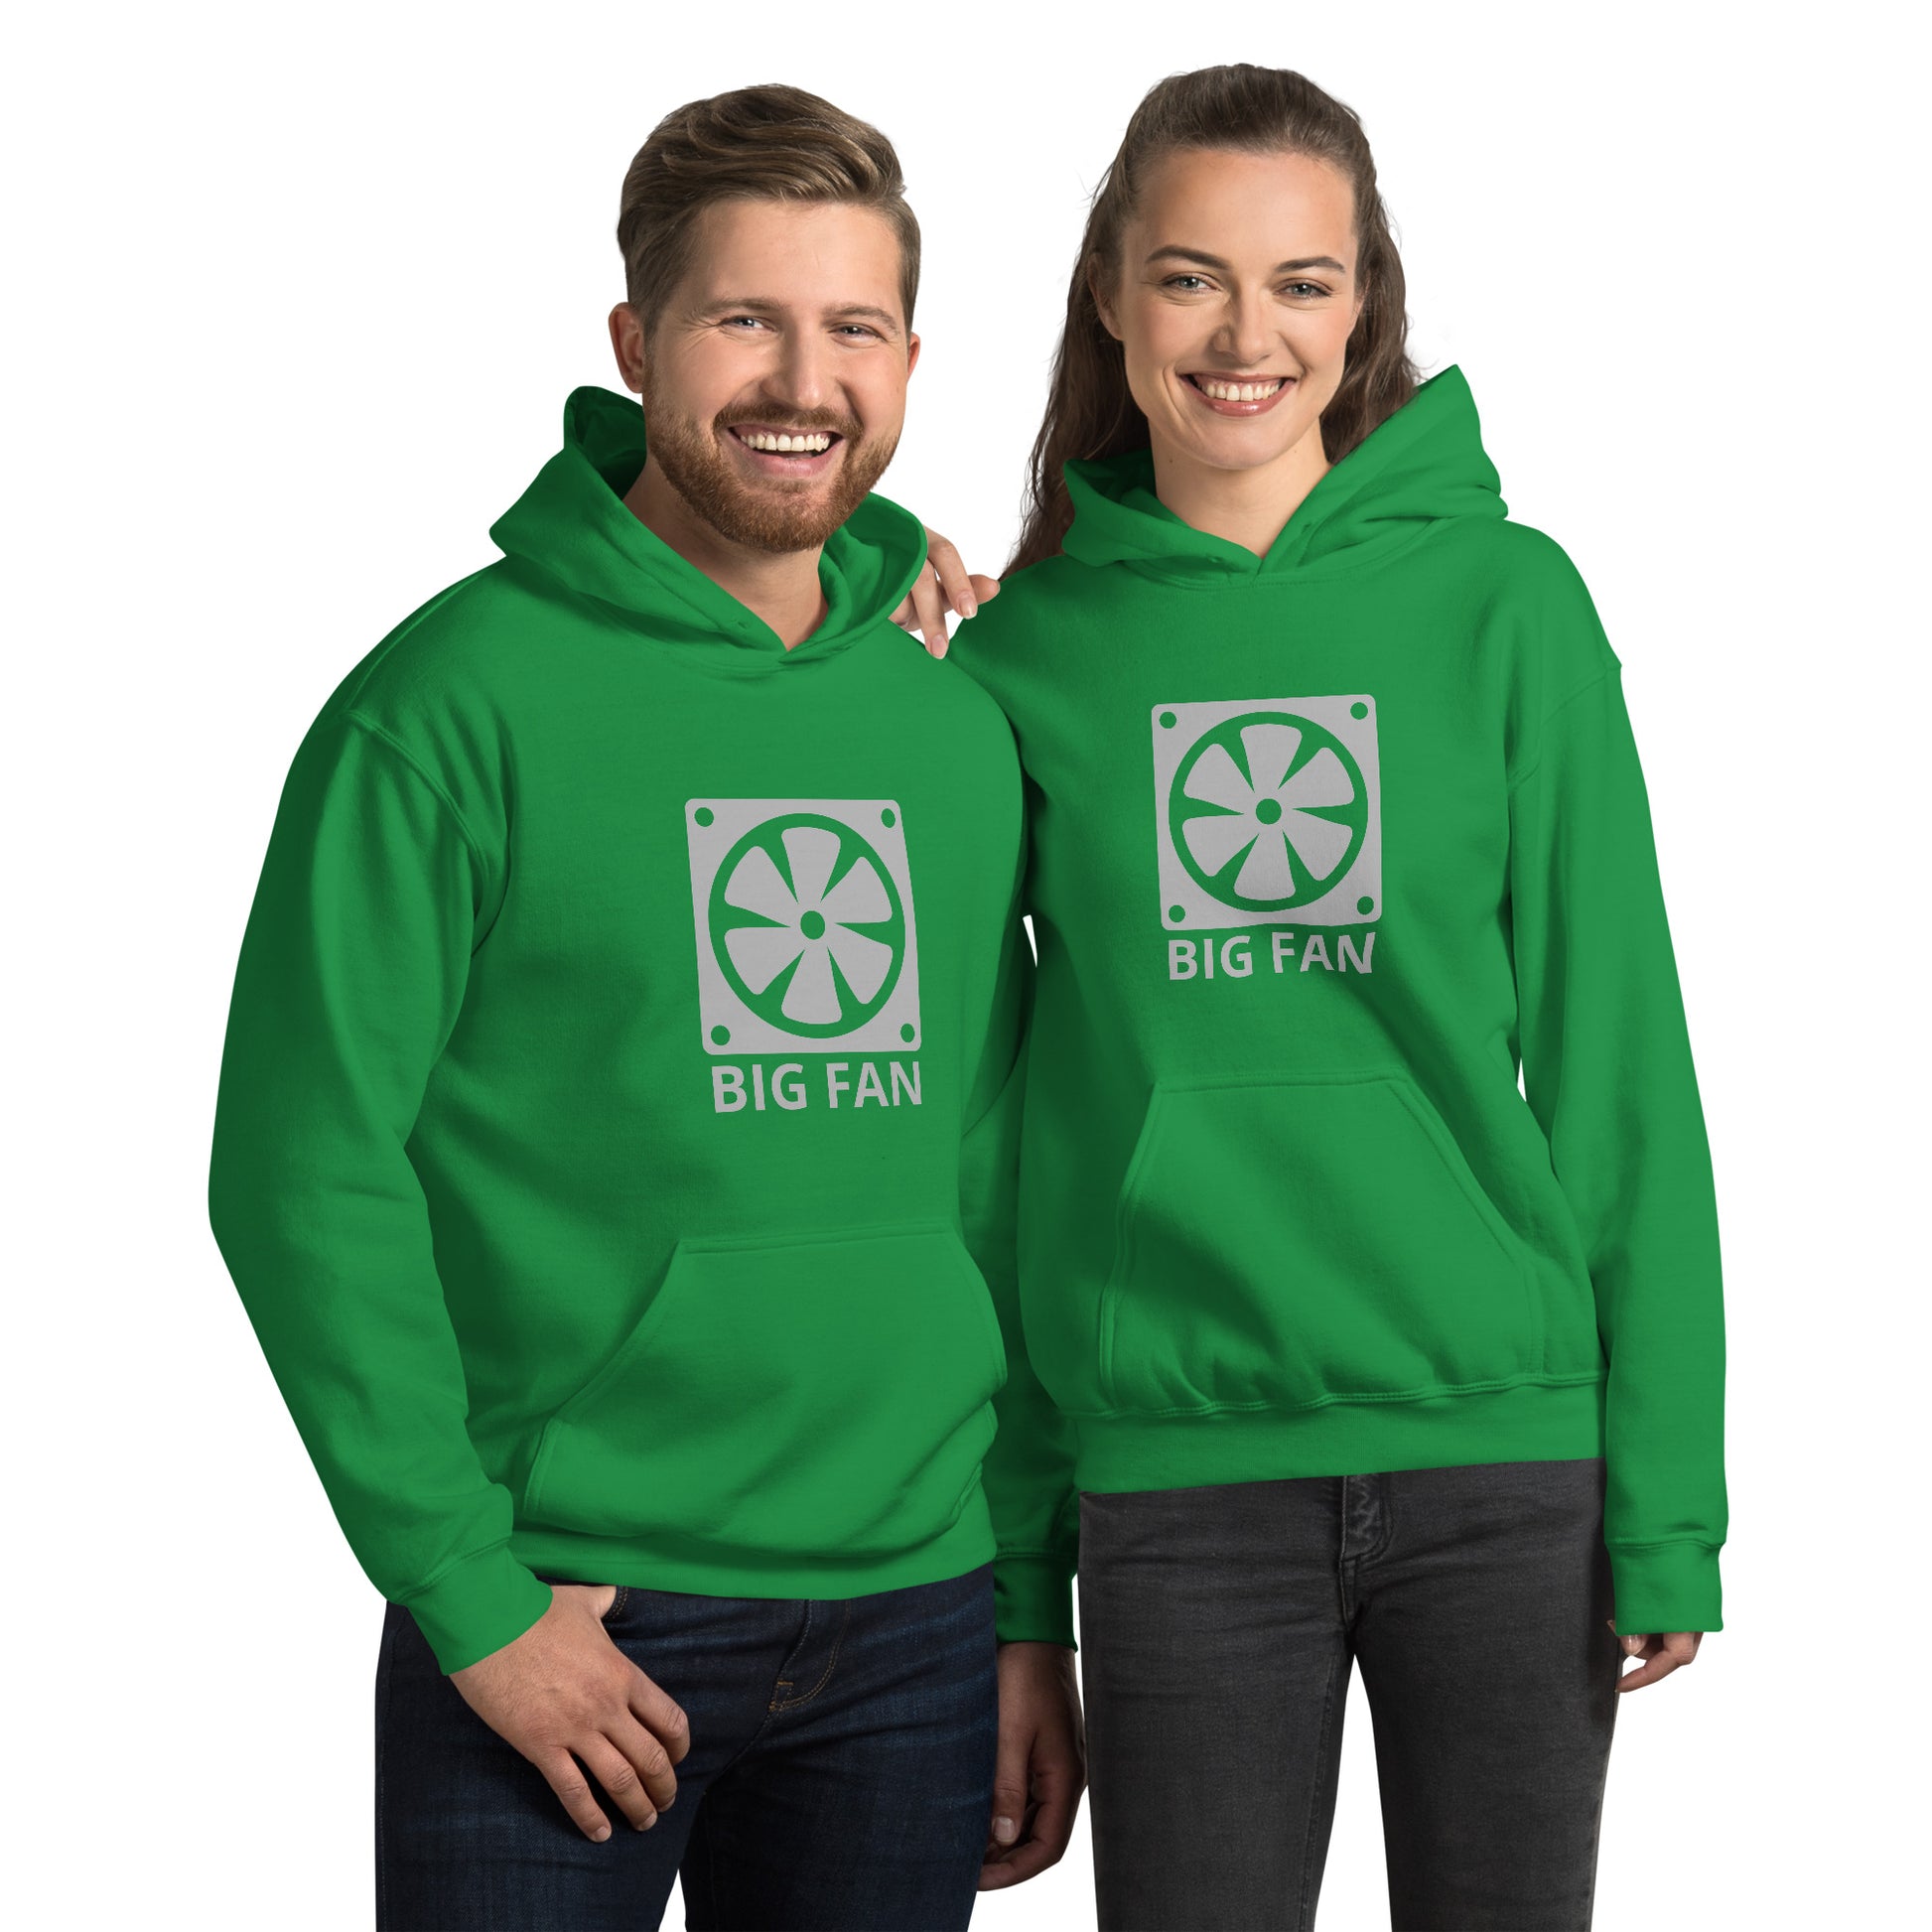 Man and women with Irish green hoodie with image of a big computer fan and the text "BIG FAN"